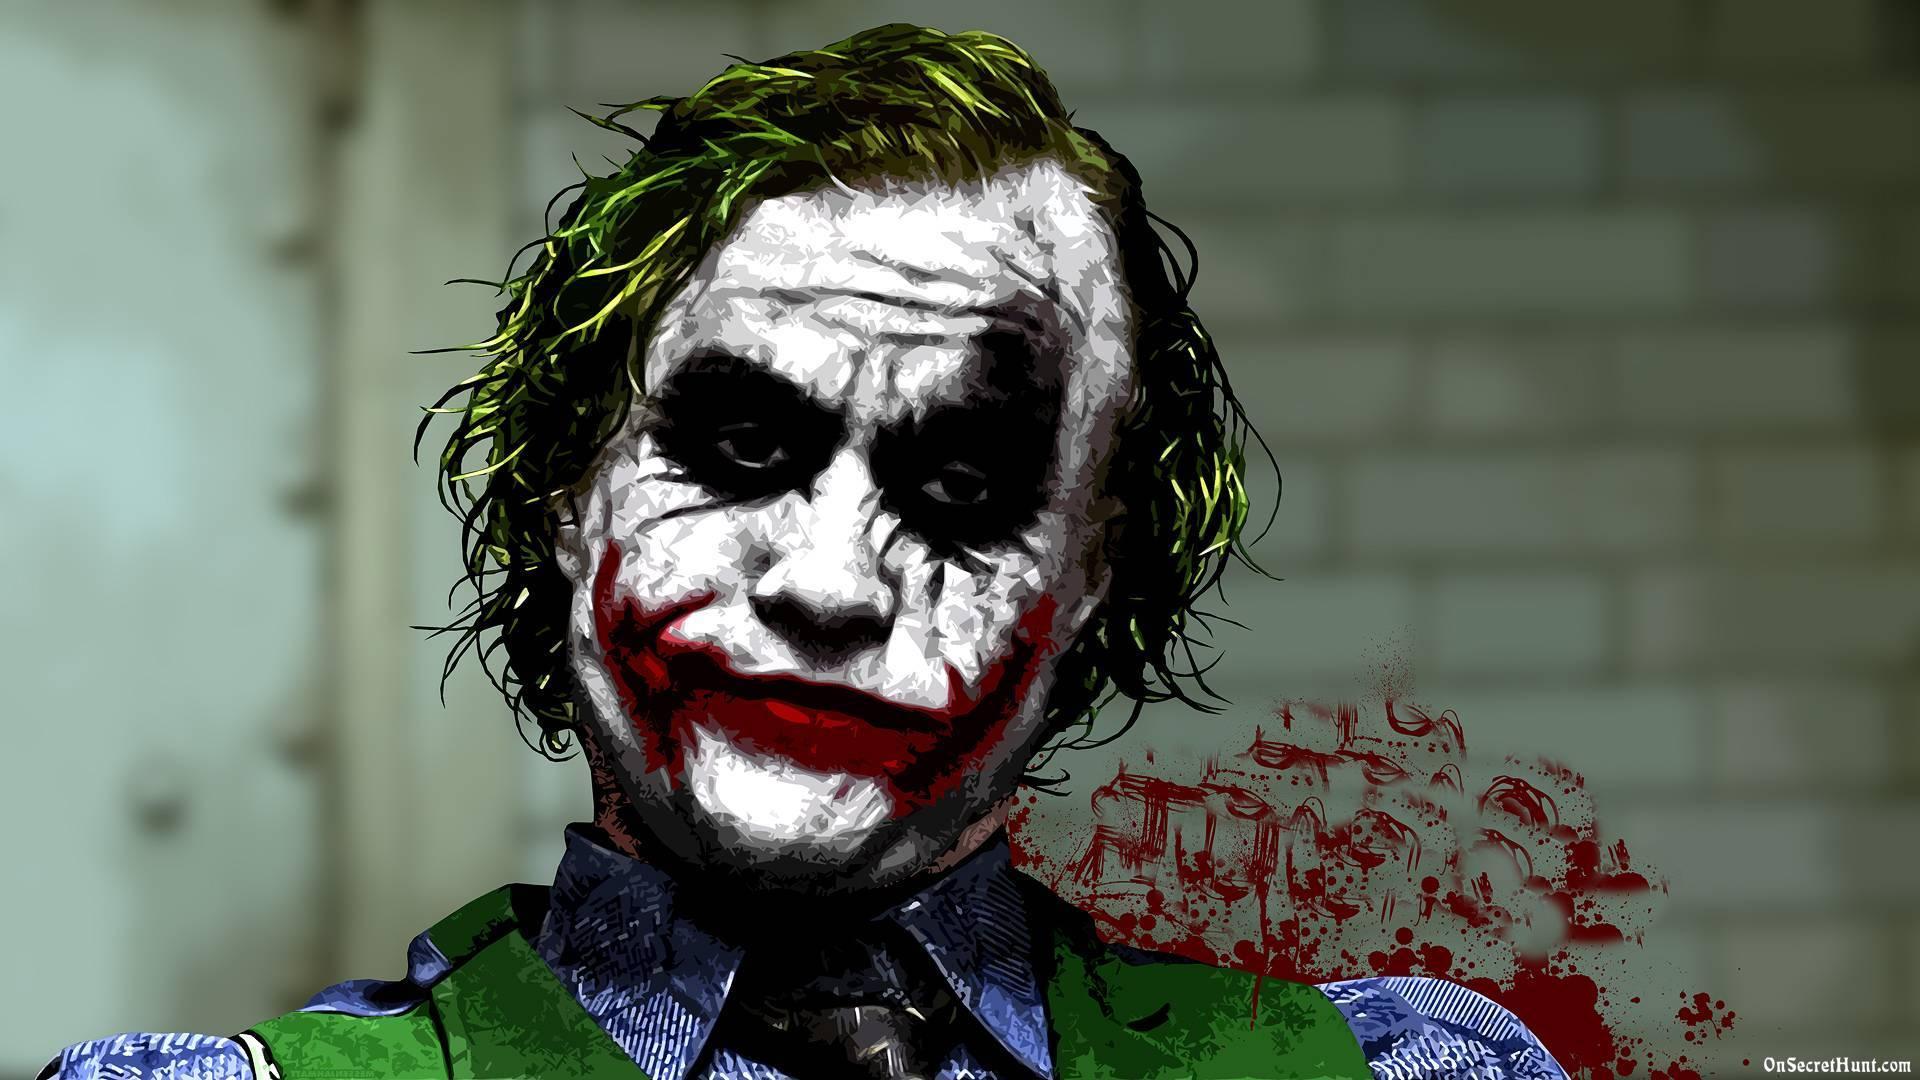 Joker HD Wallpaper for Android - APK Download